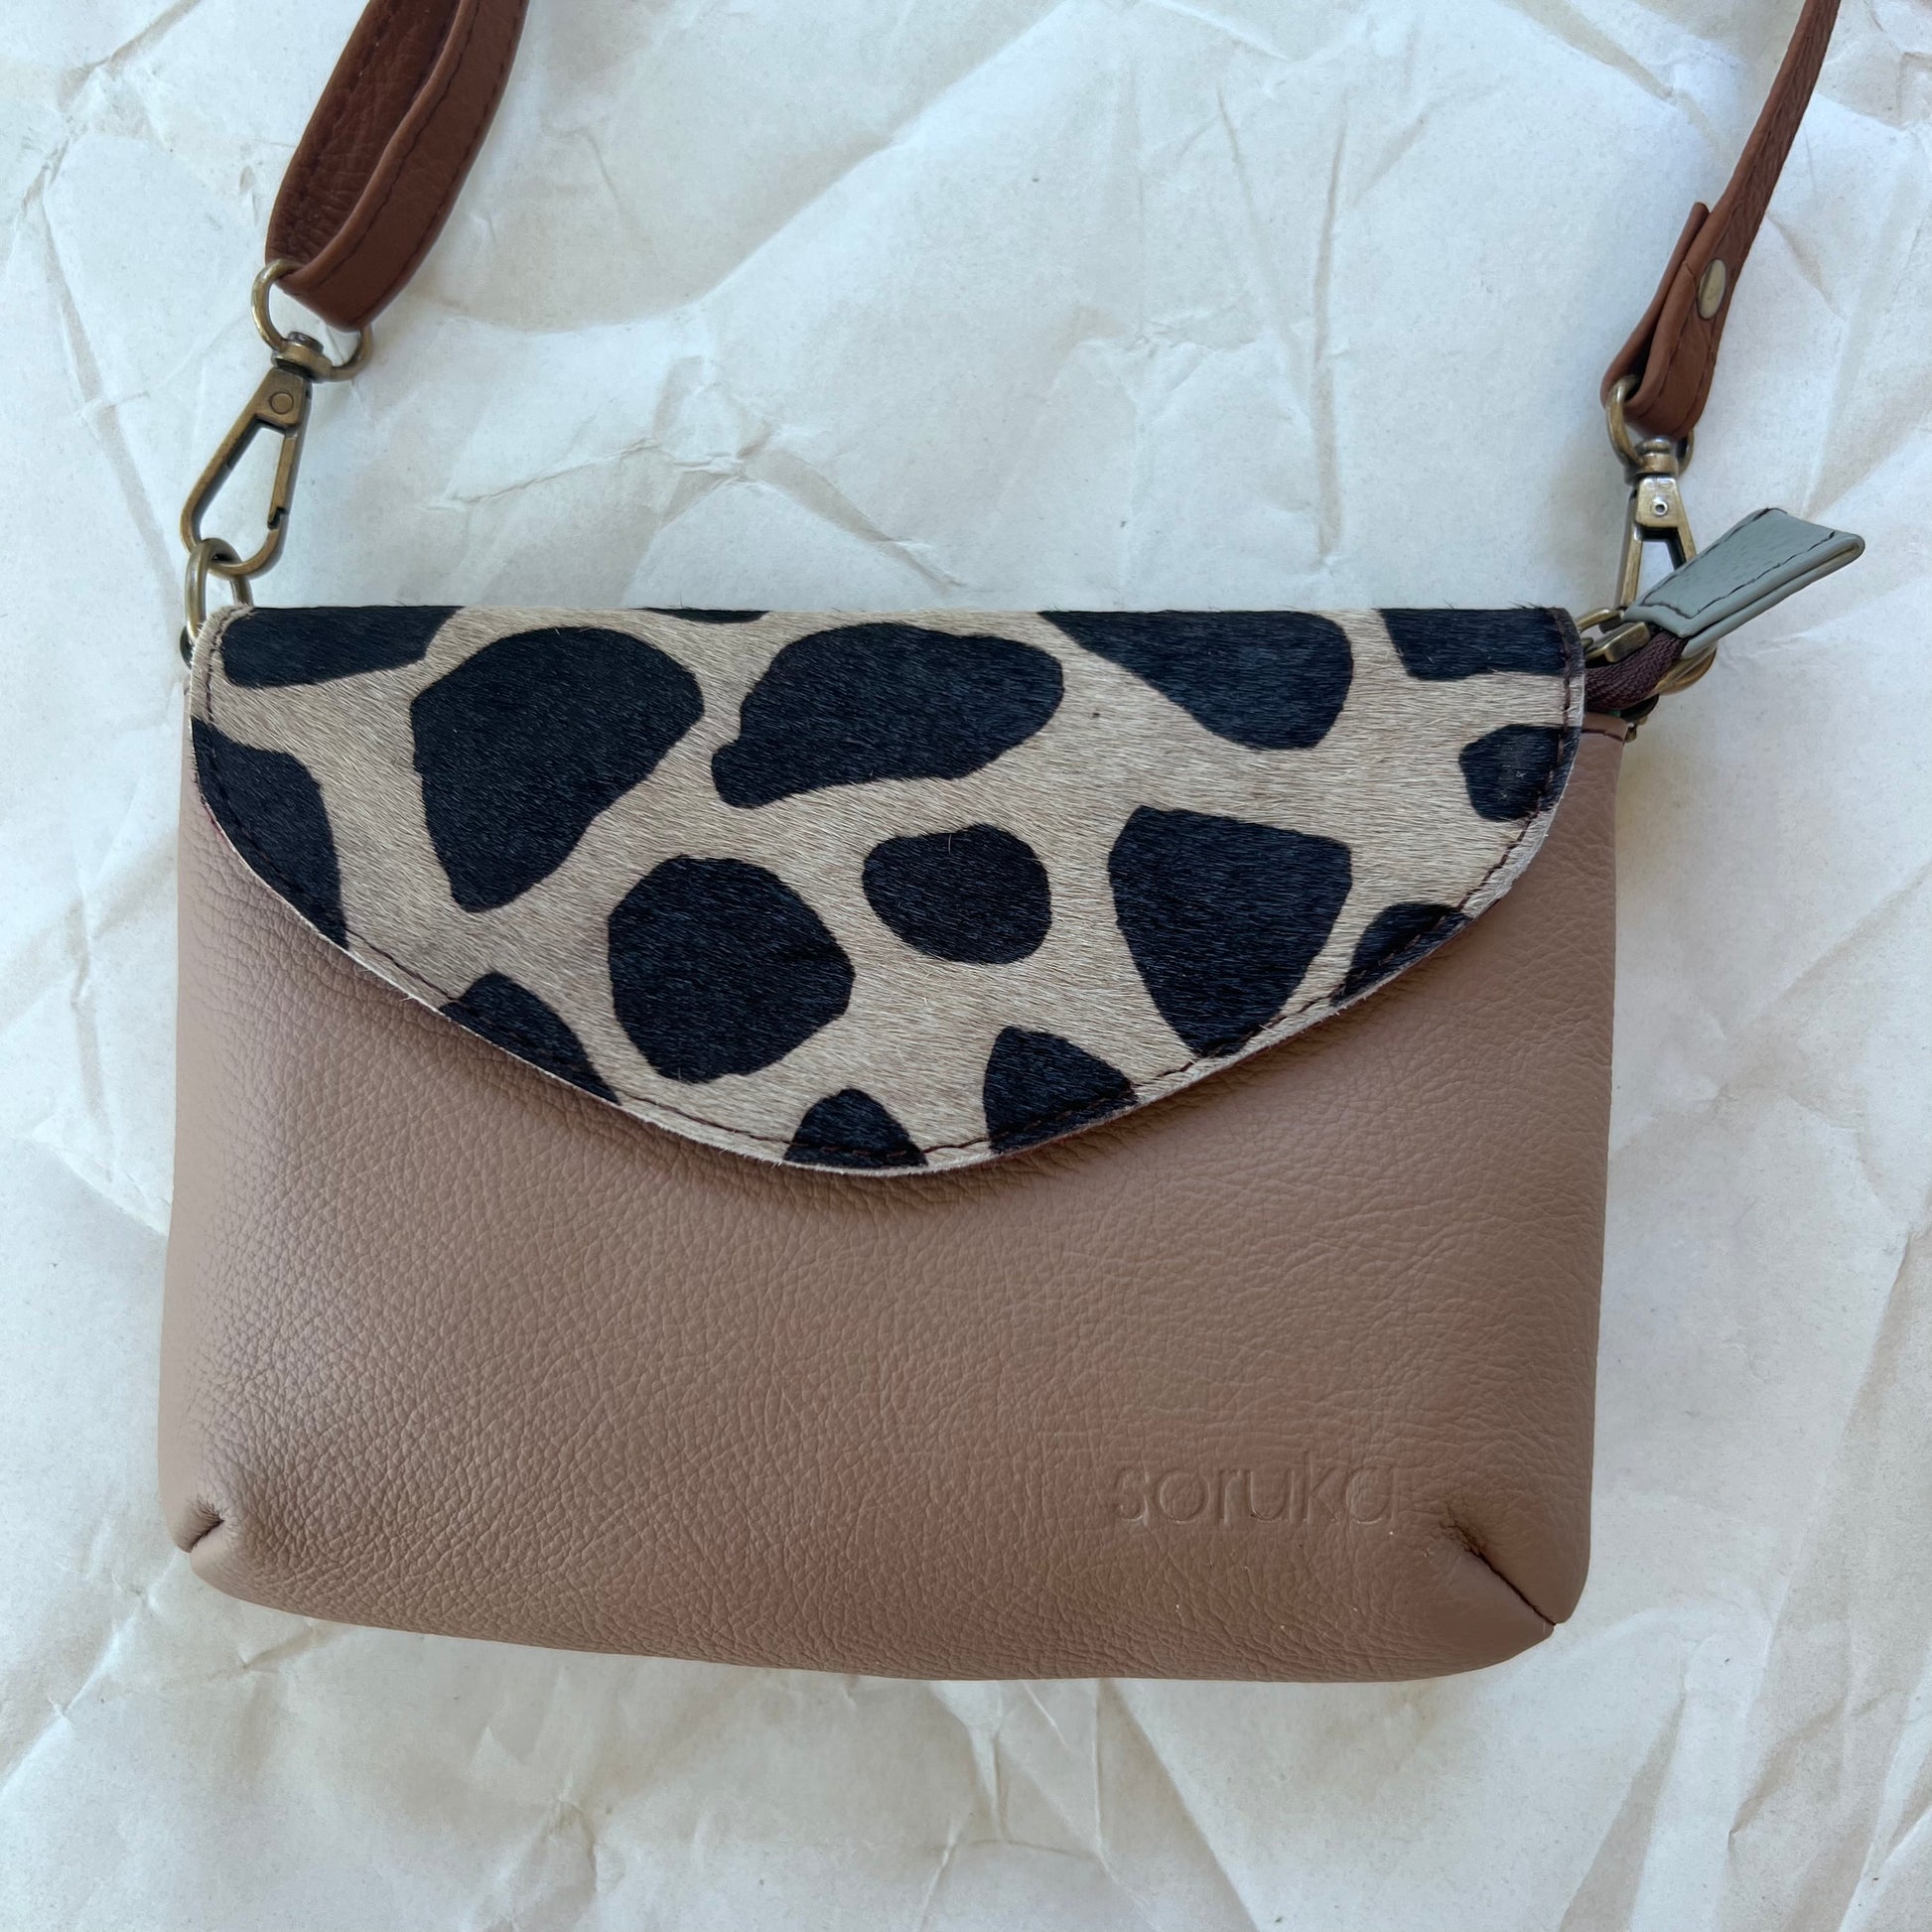 small taupe carol bag with black and white animal print flap and brown shoulder strap.